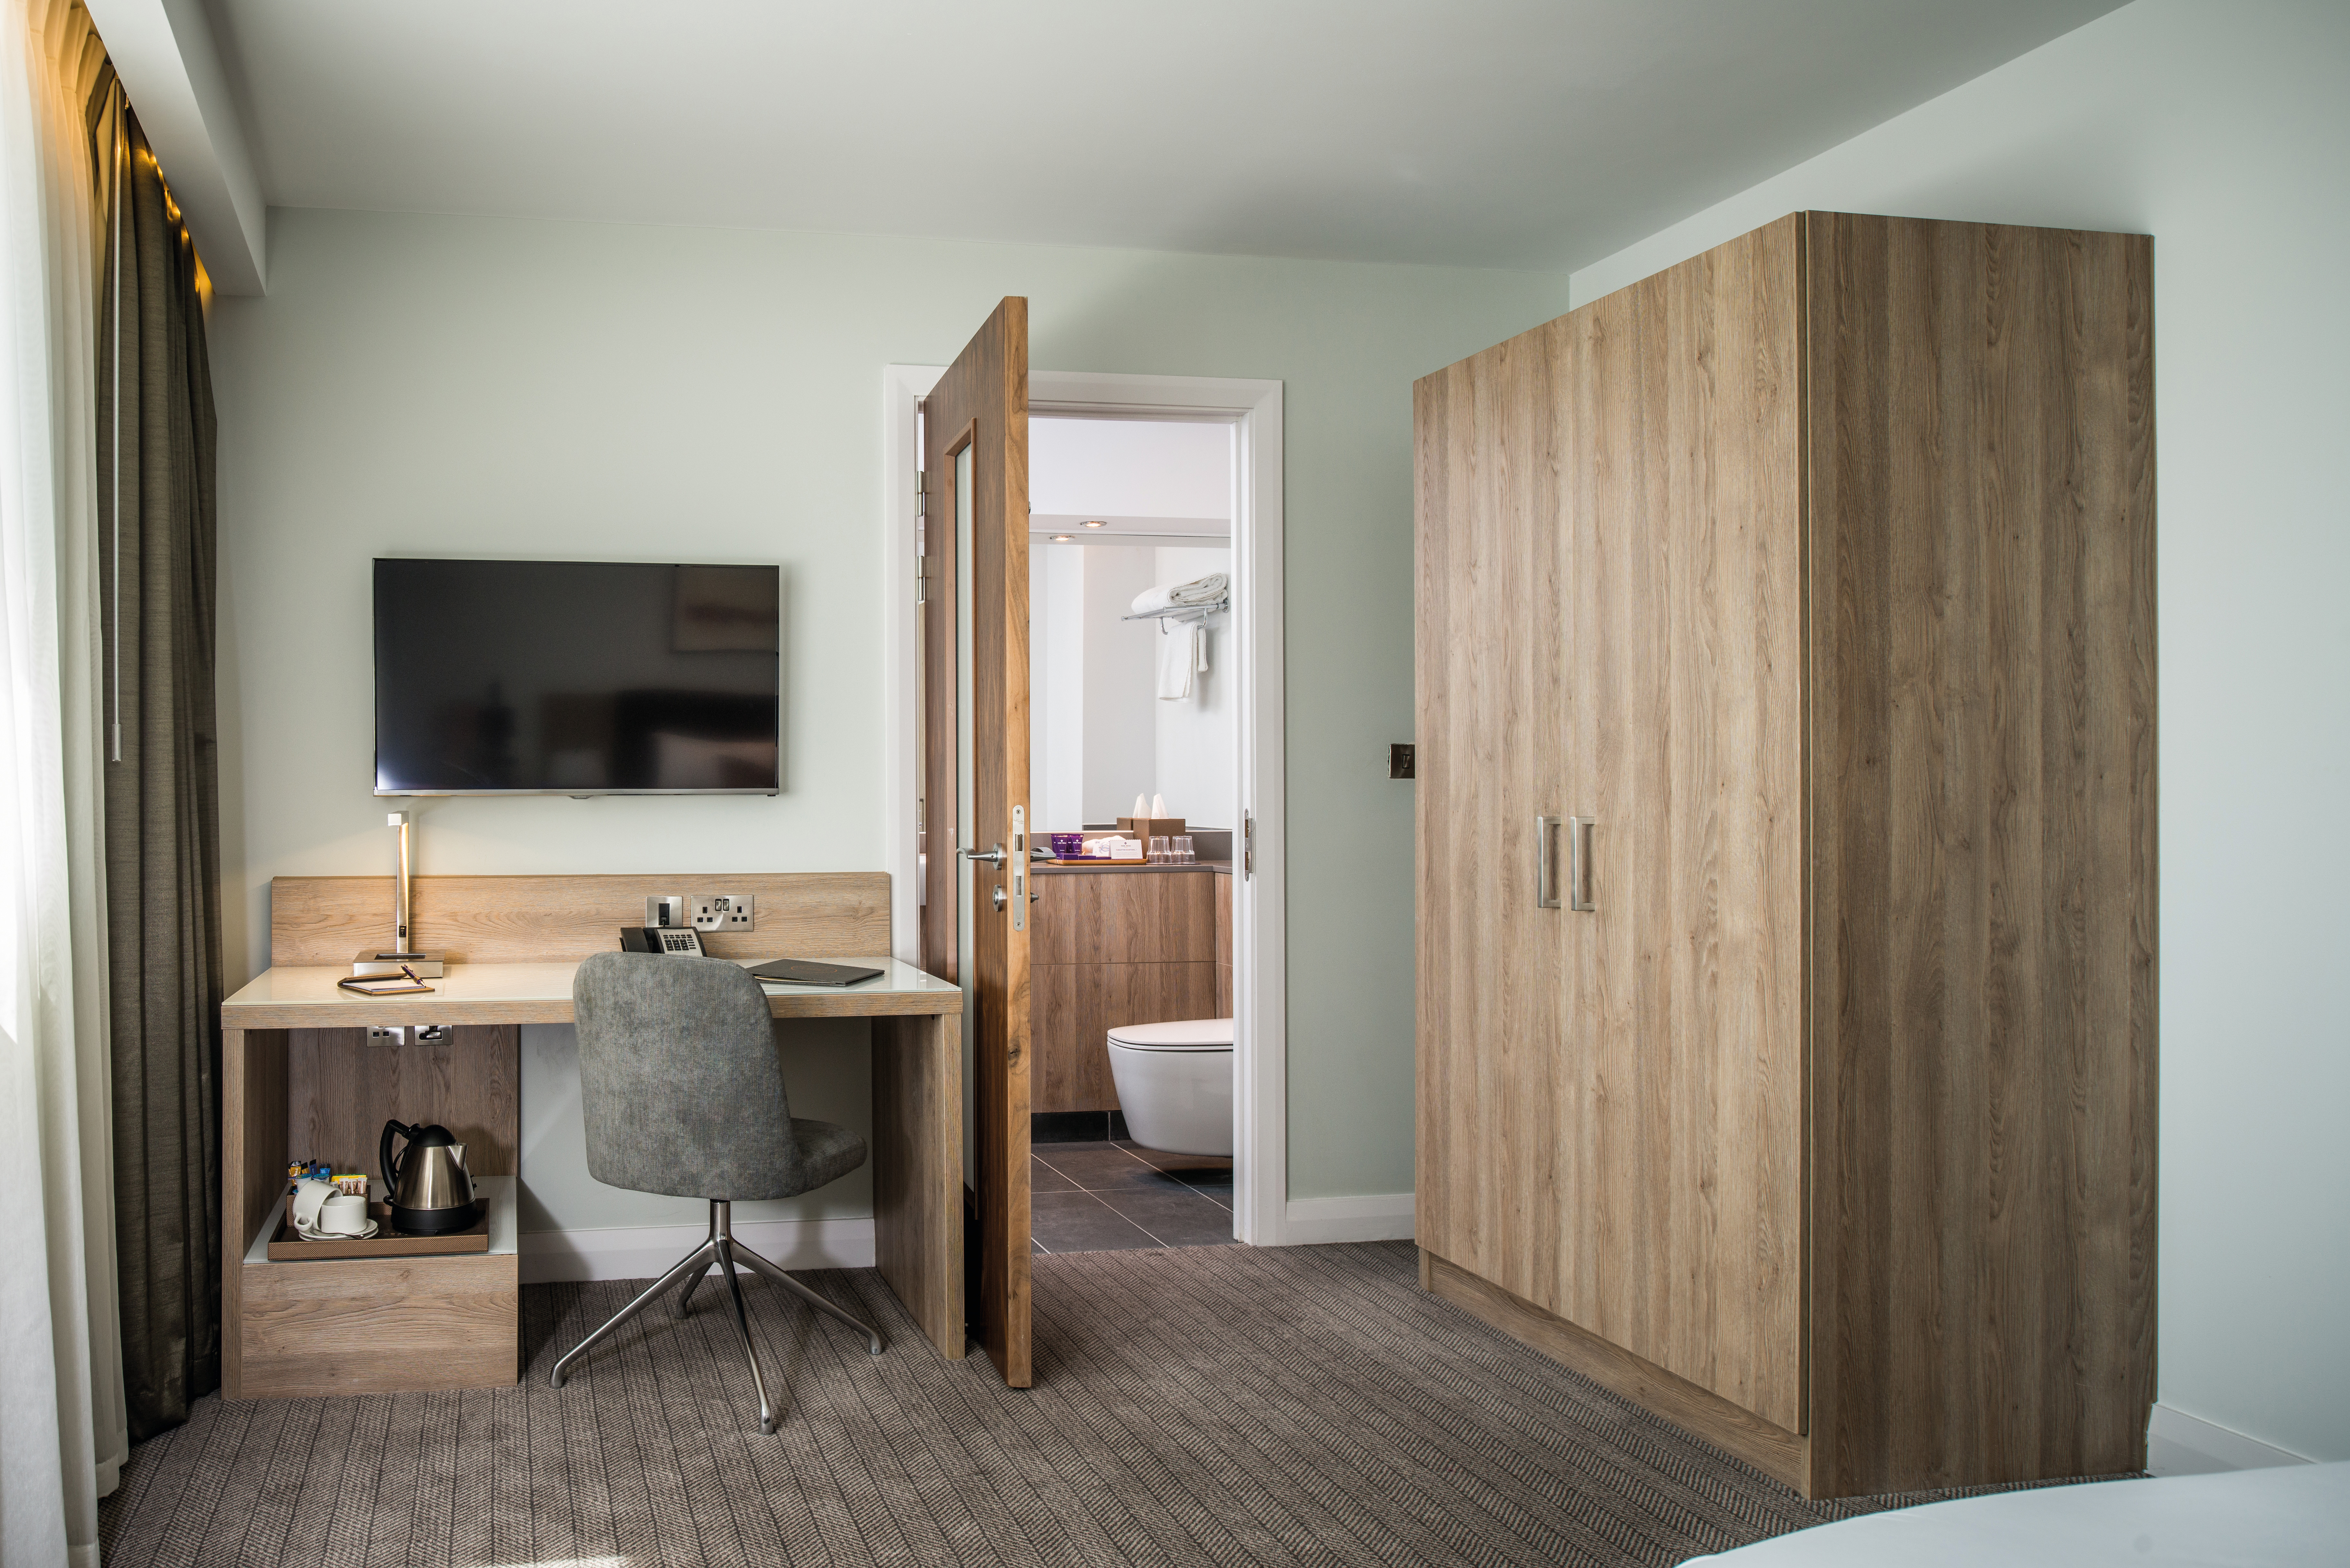 EGGER H3326 ST28 Grey Beige Gladstone Oak was used through the hotel room, including the bathroom panels.